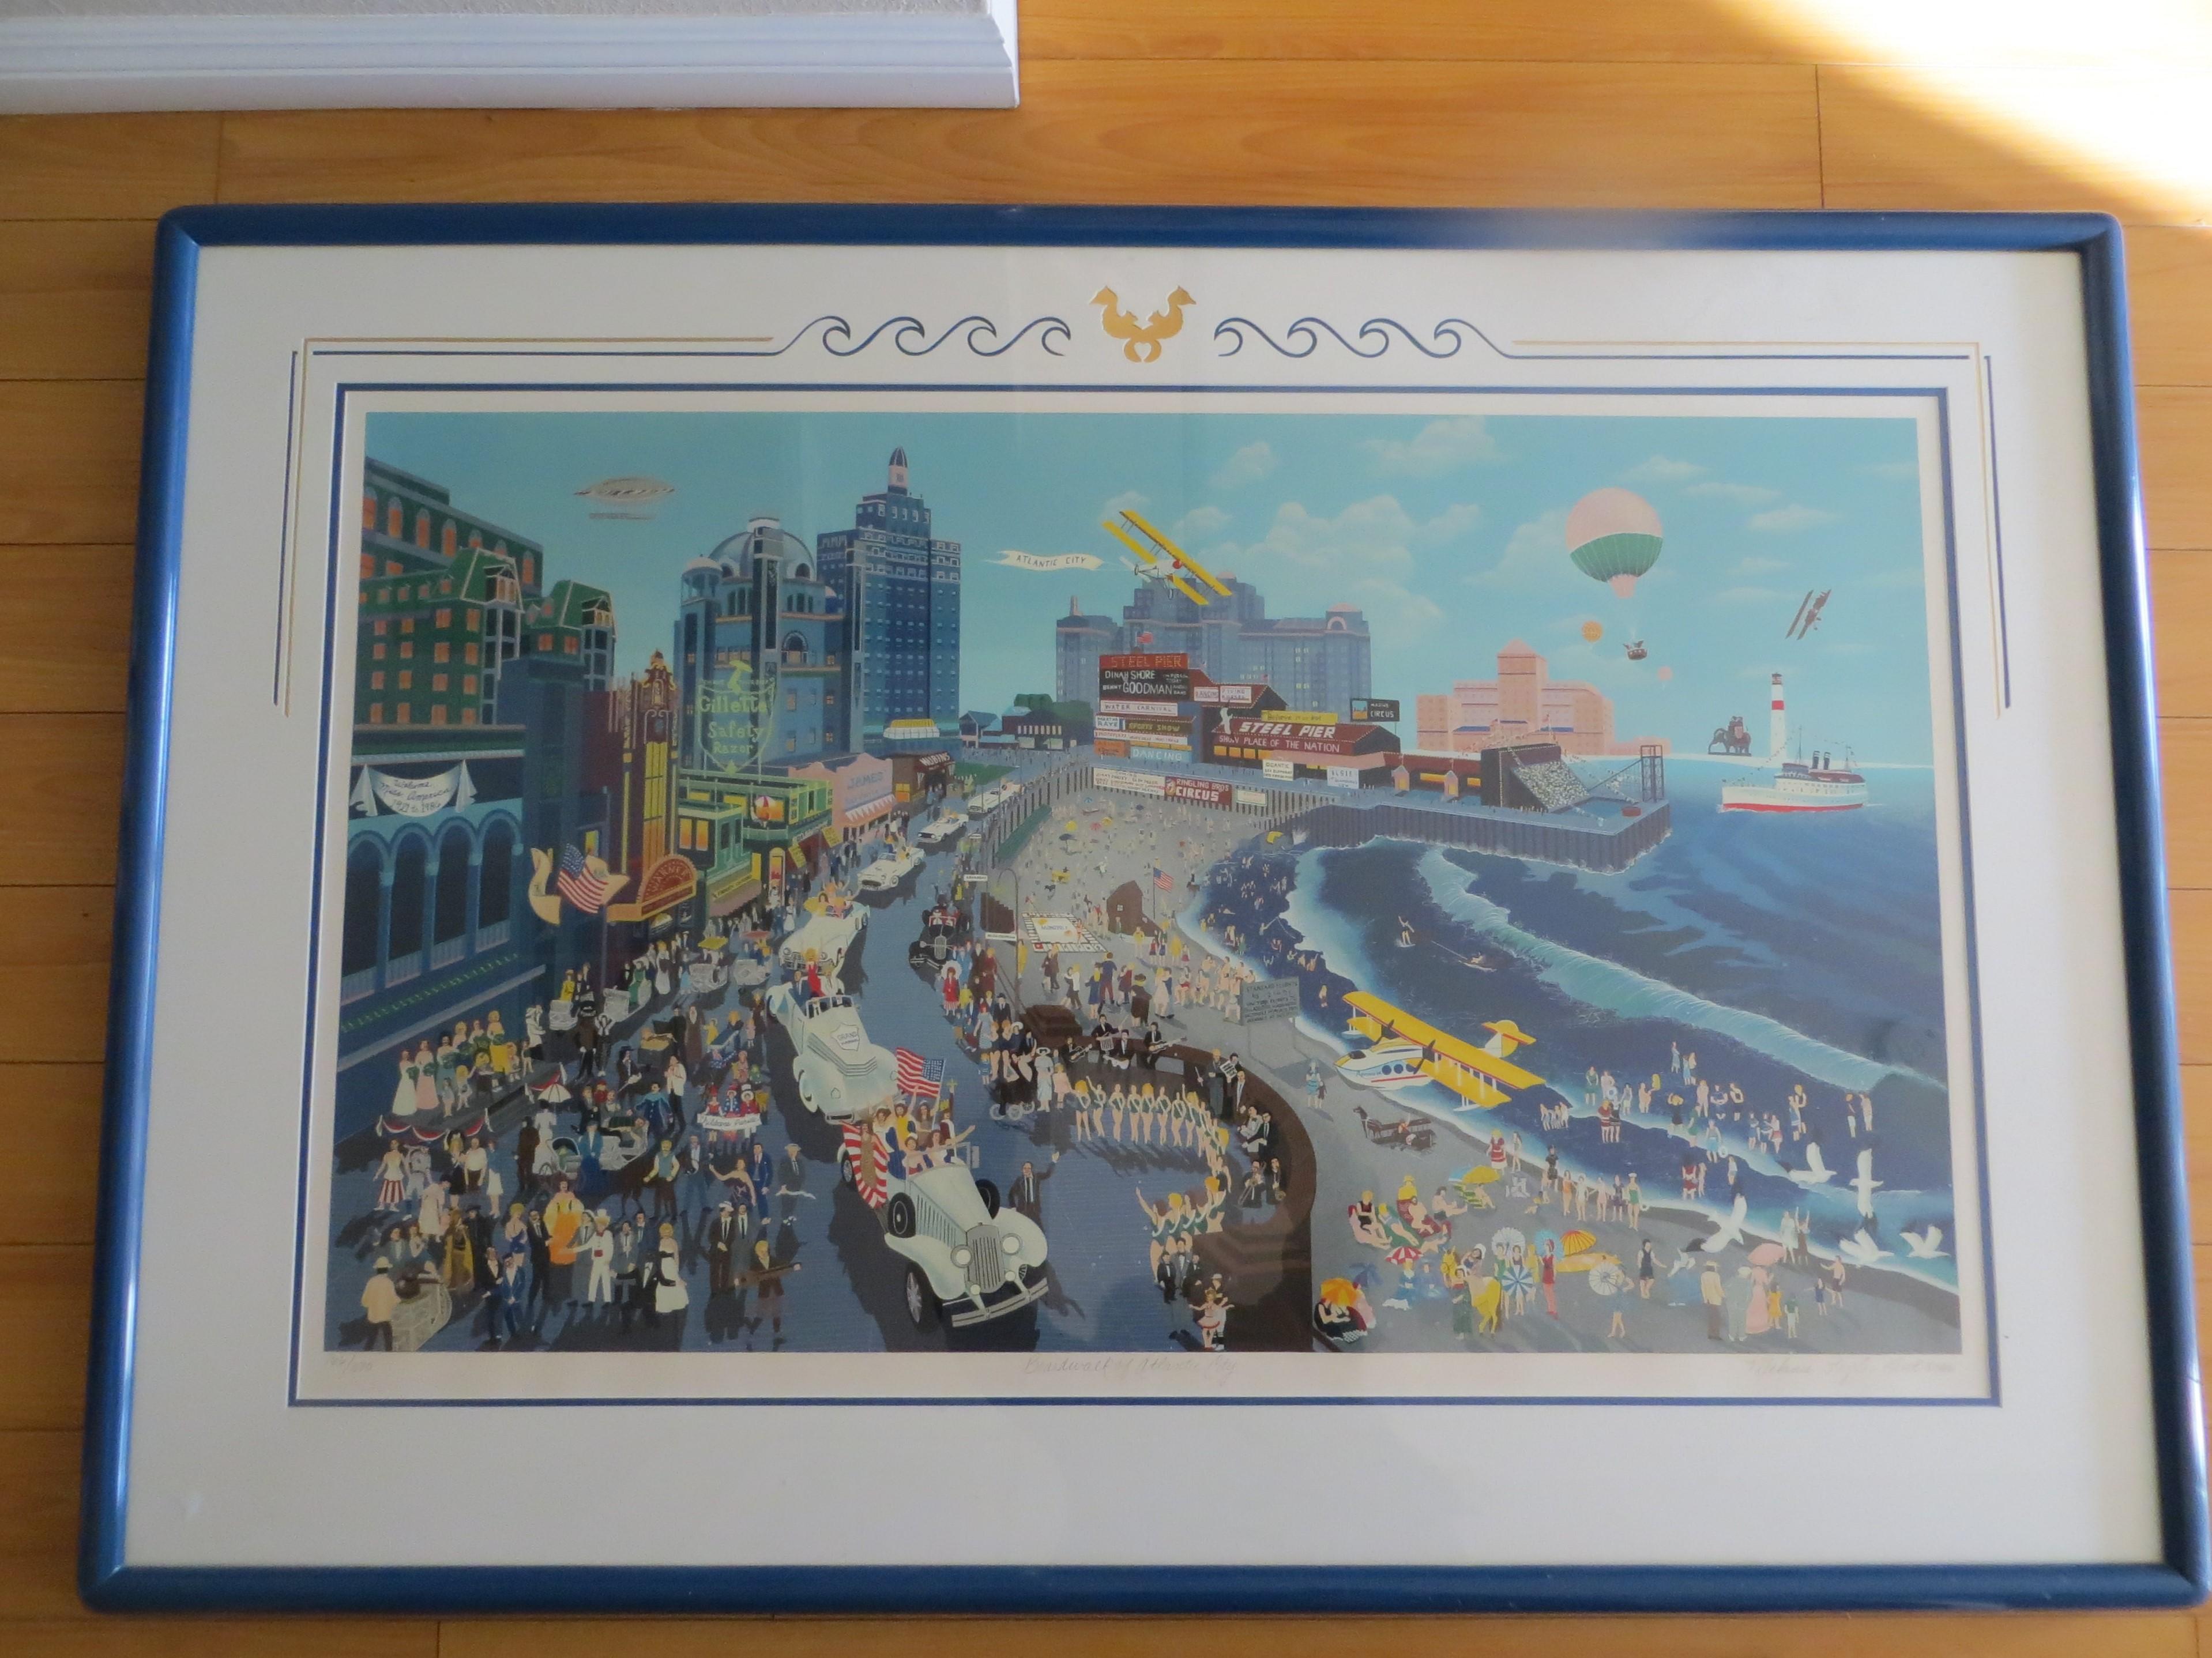 Boardwalk of Atlantic City lithograph by Melanie Taylor - Contemporary Print by Melanie Taylor Kent 